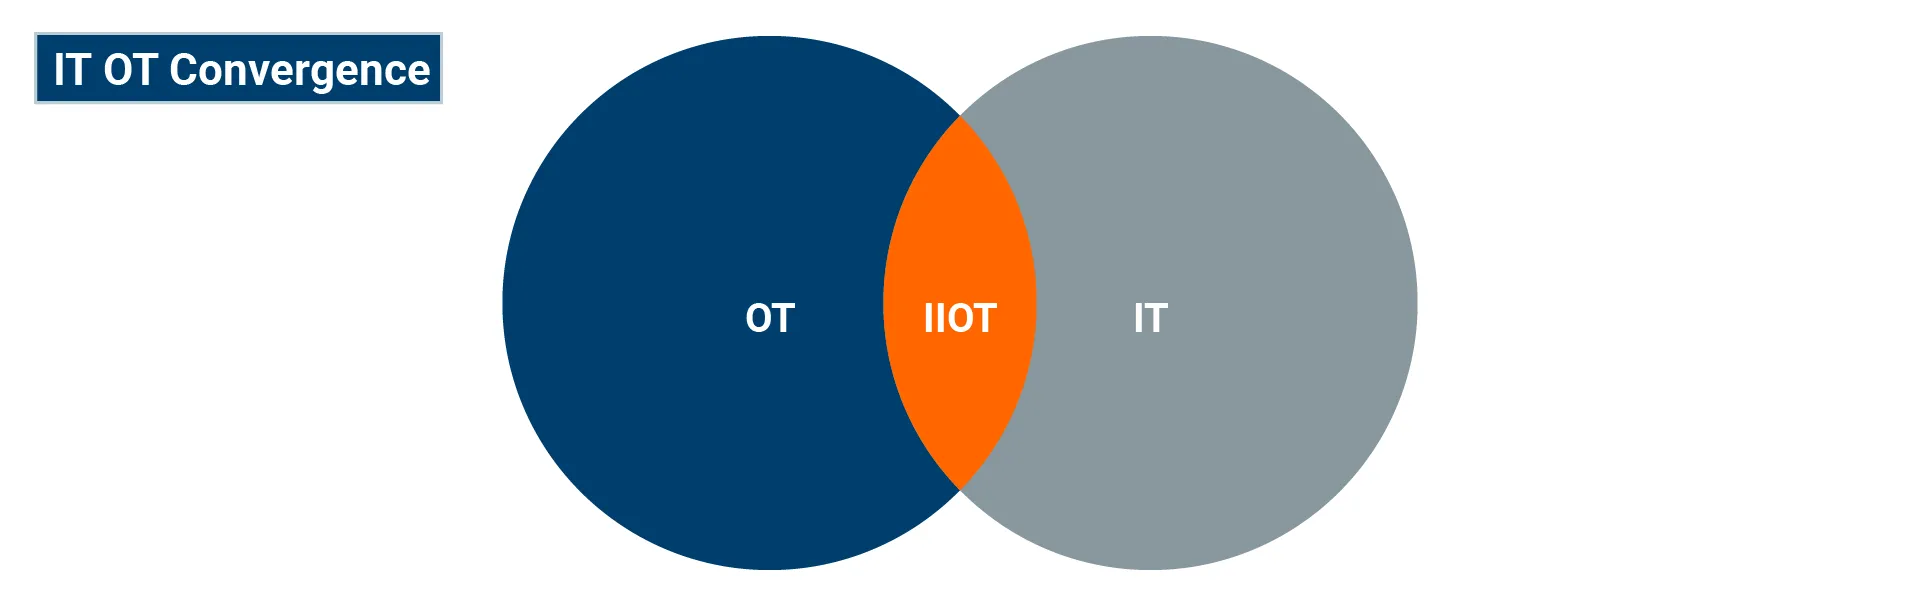 Figure 2: IIoT serves as the intersection point between OT and IT systems